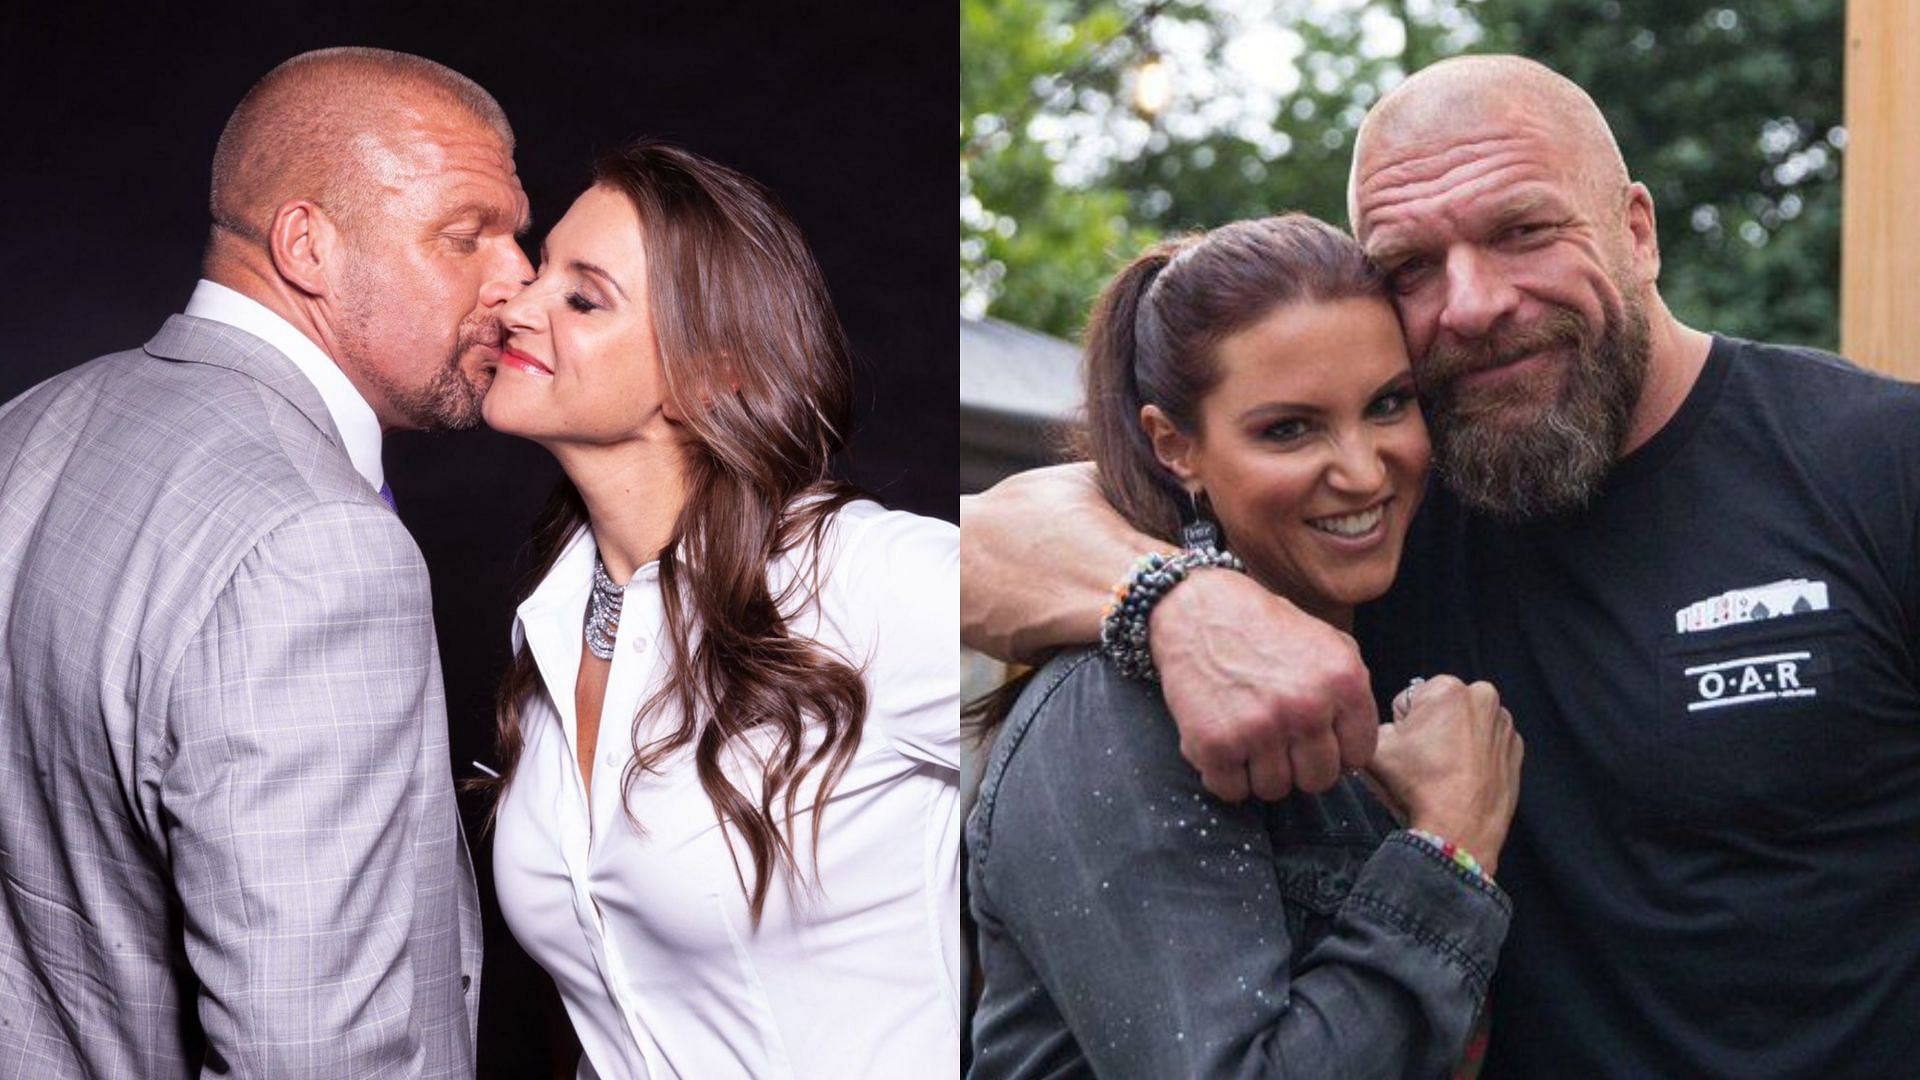 Triple H and Stephanie McMahon are the most famous couple in WWE